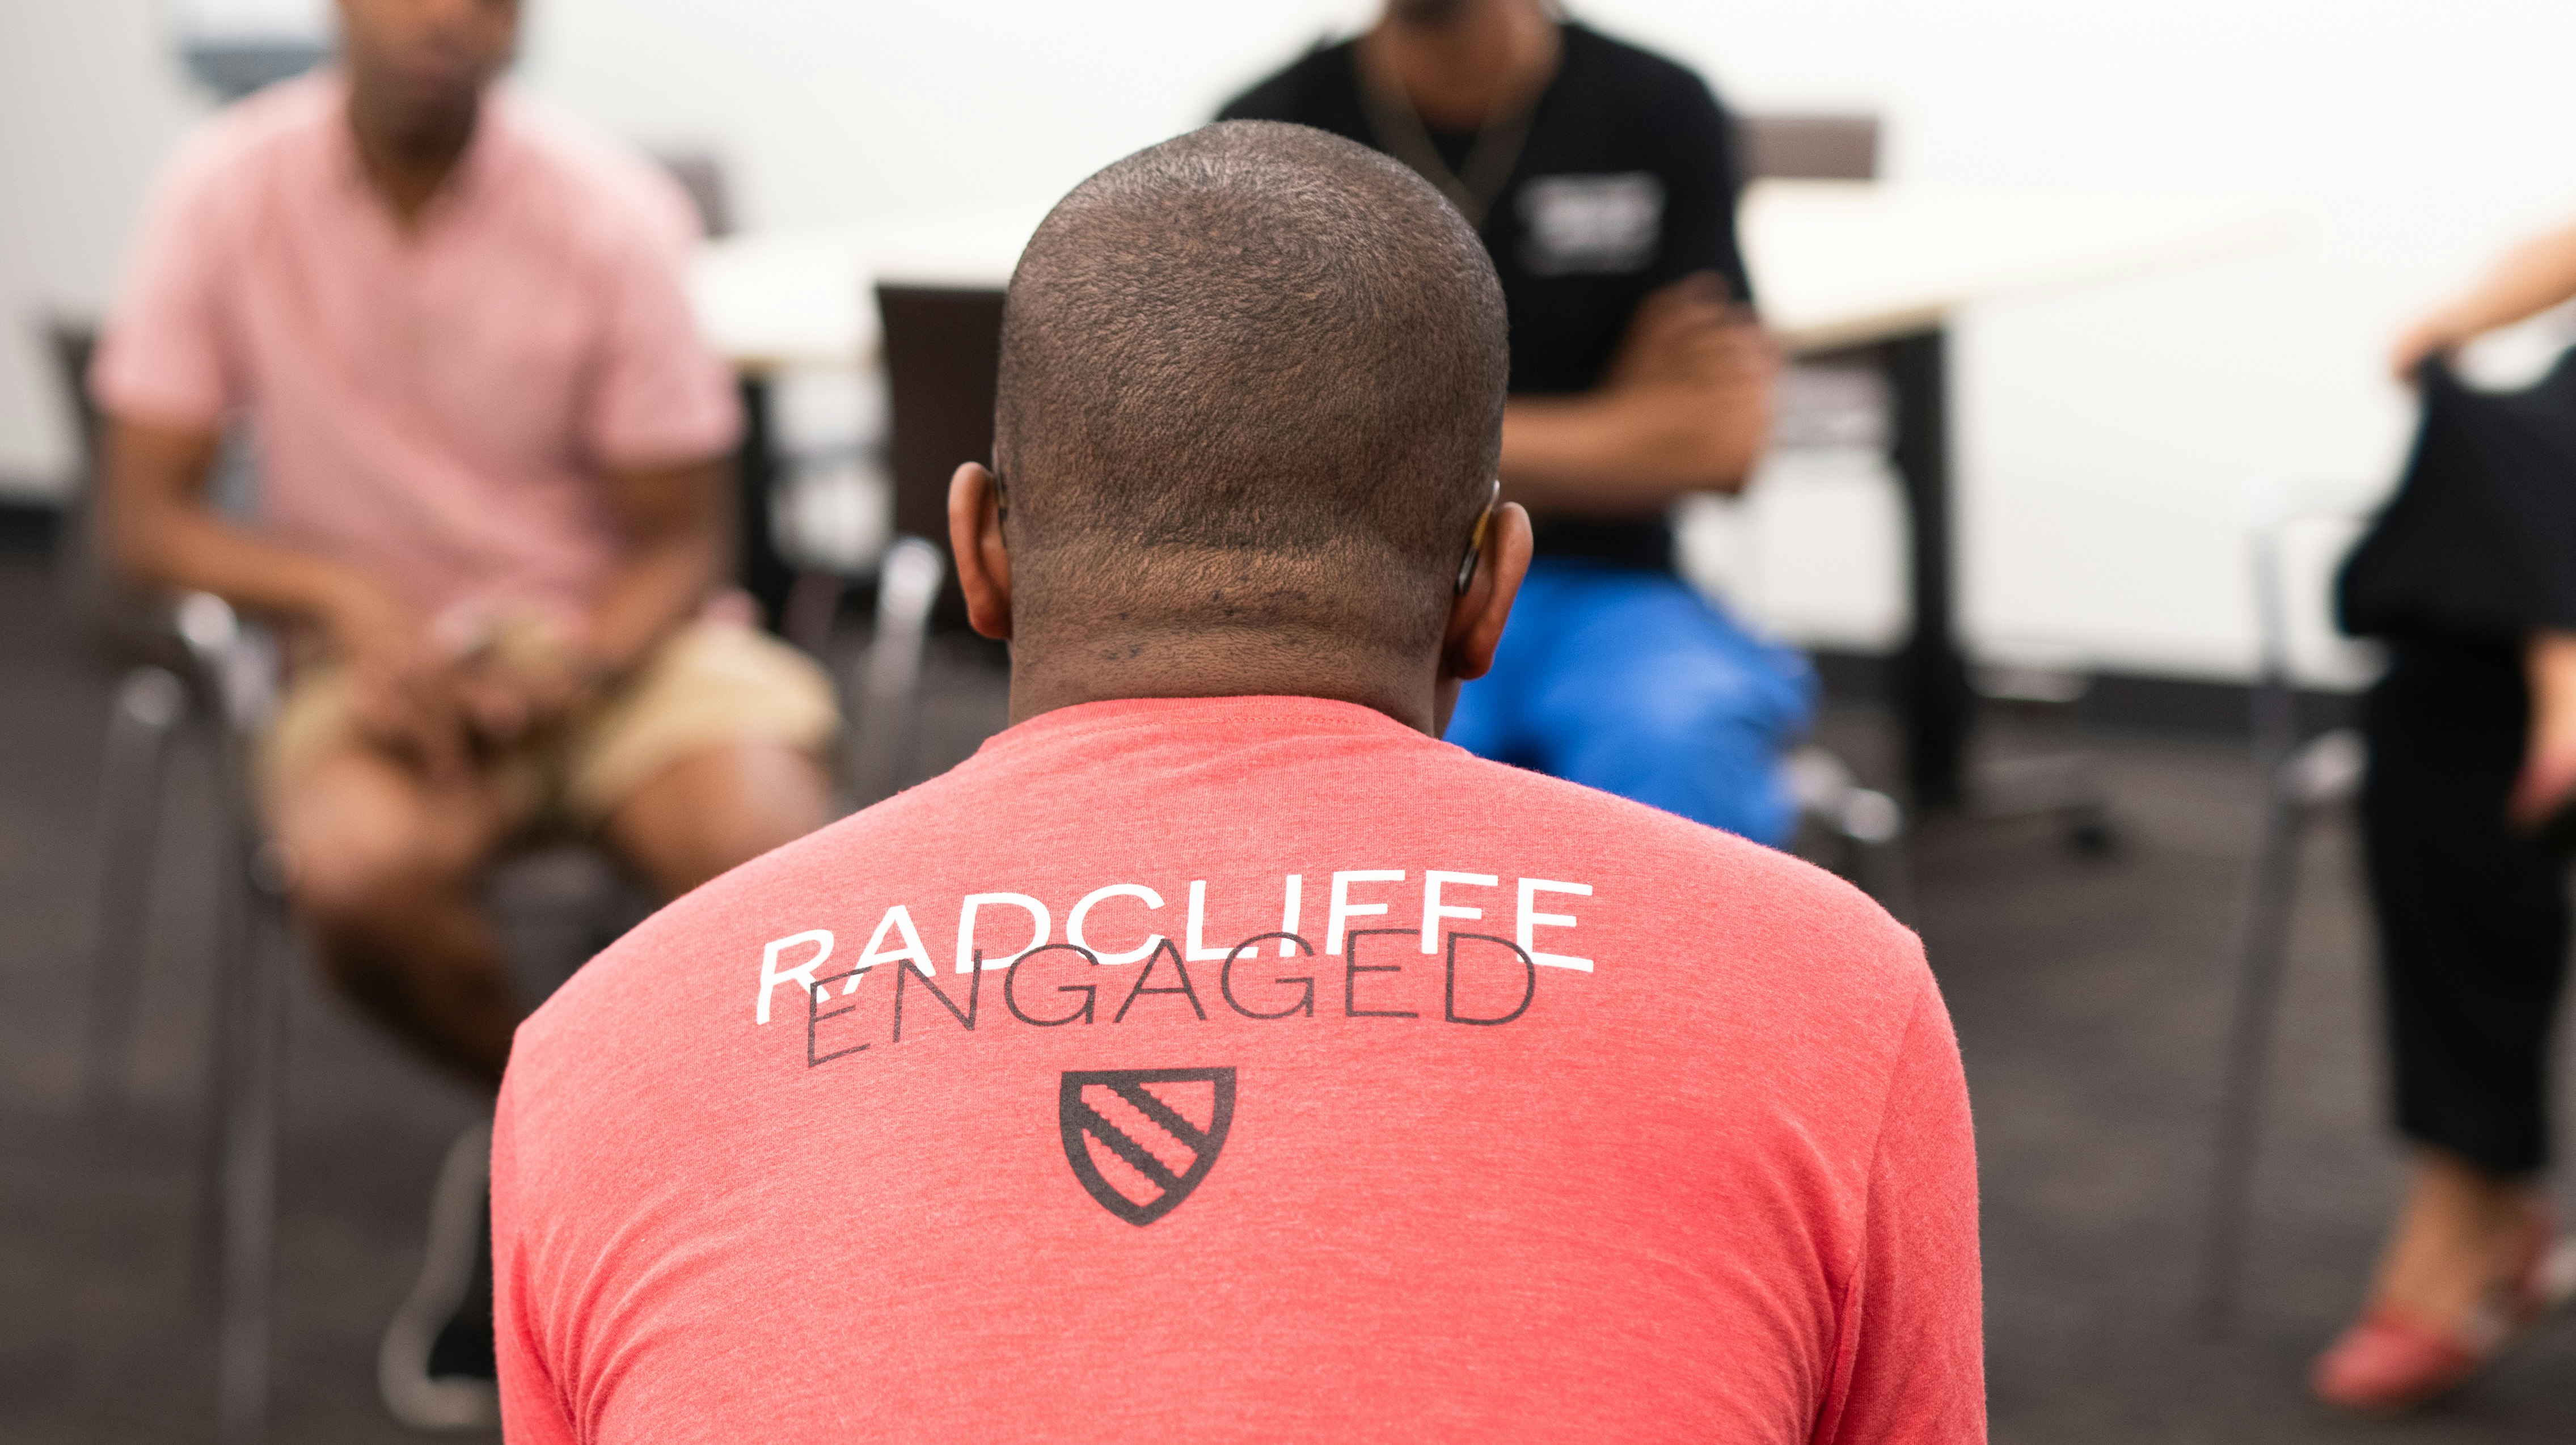 Student wearing a "Radcliffe Engaged" t-shirt